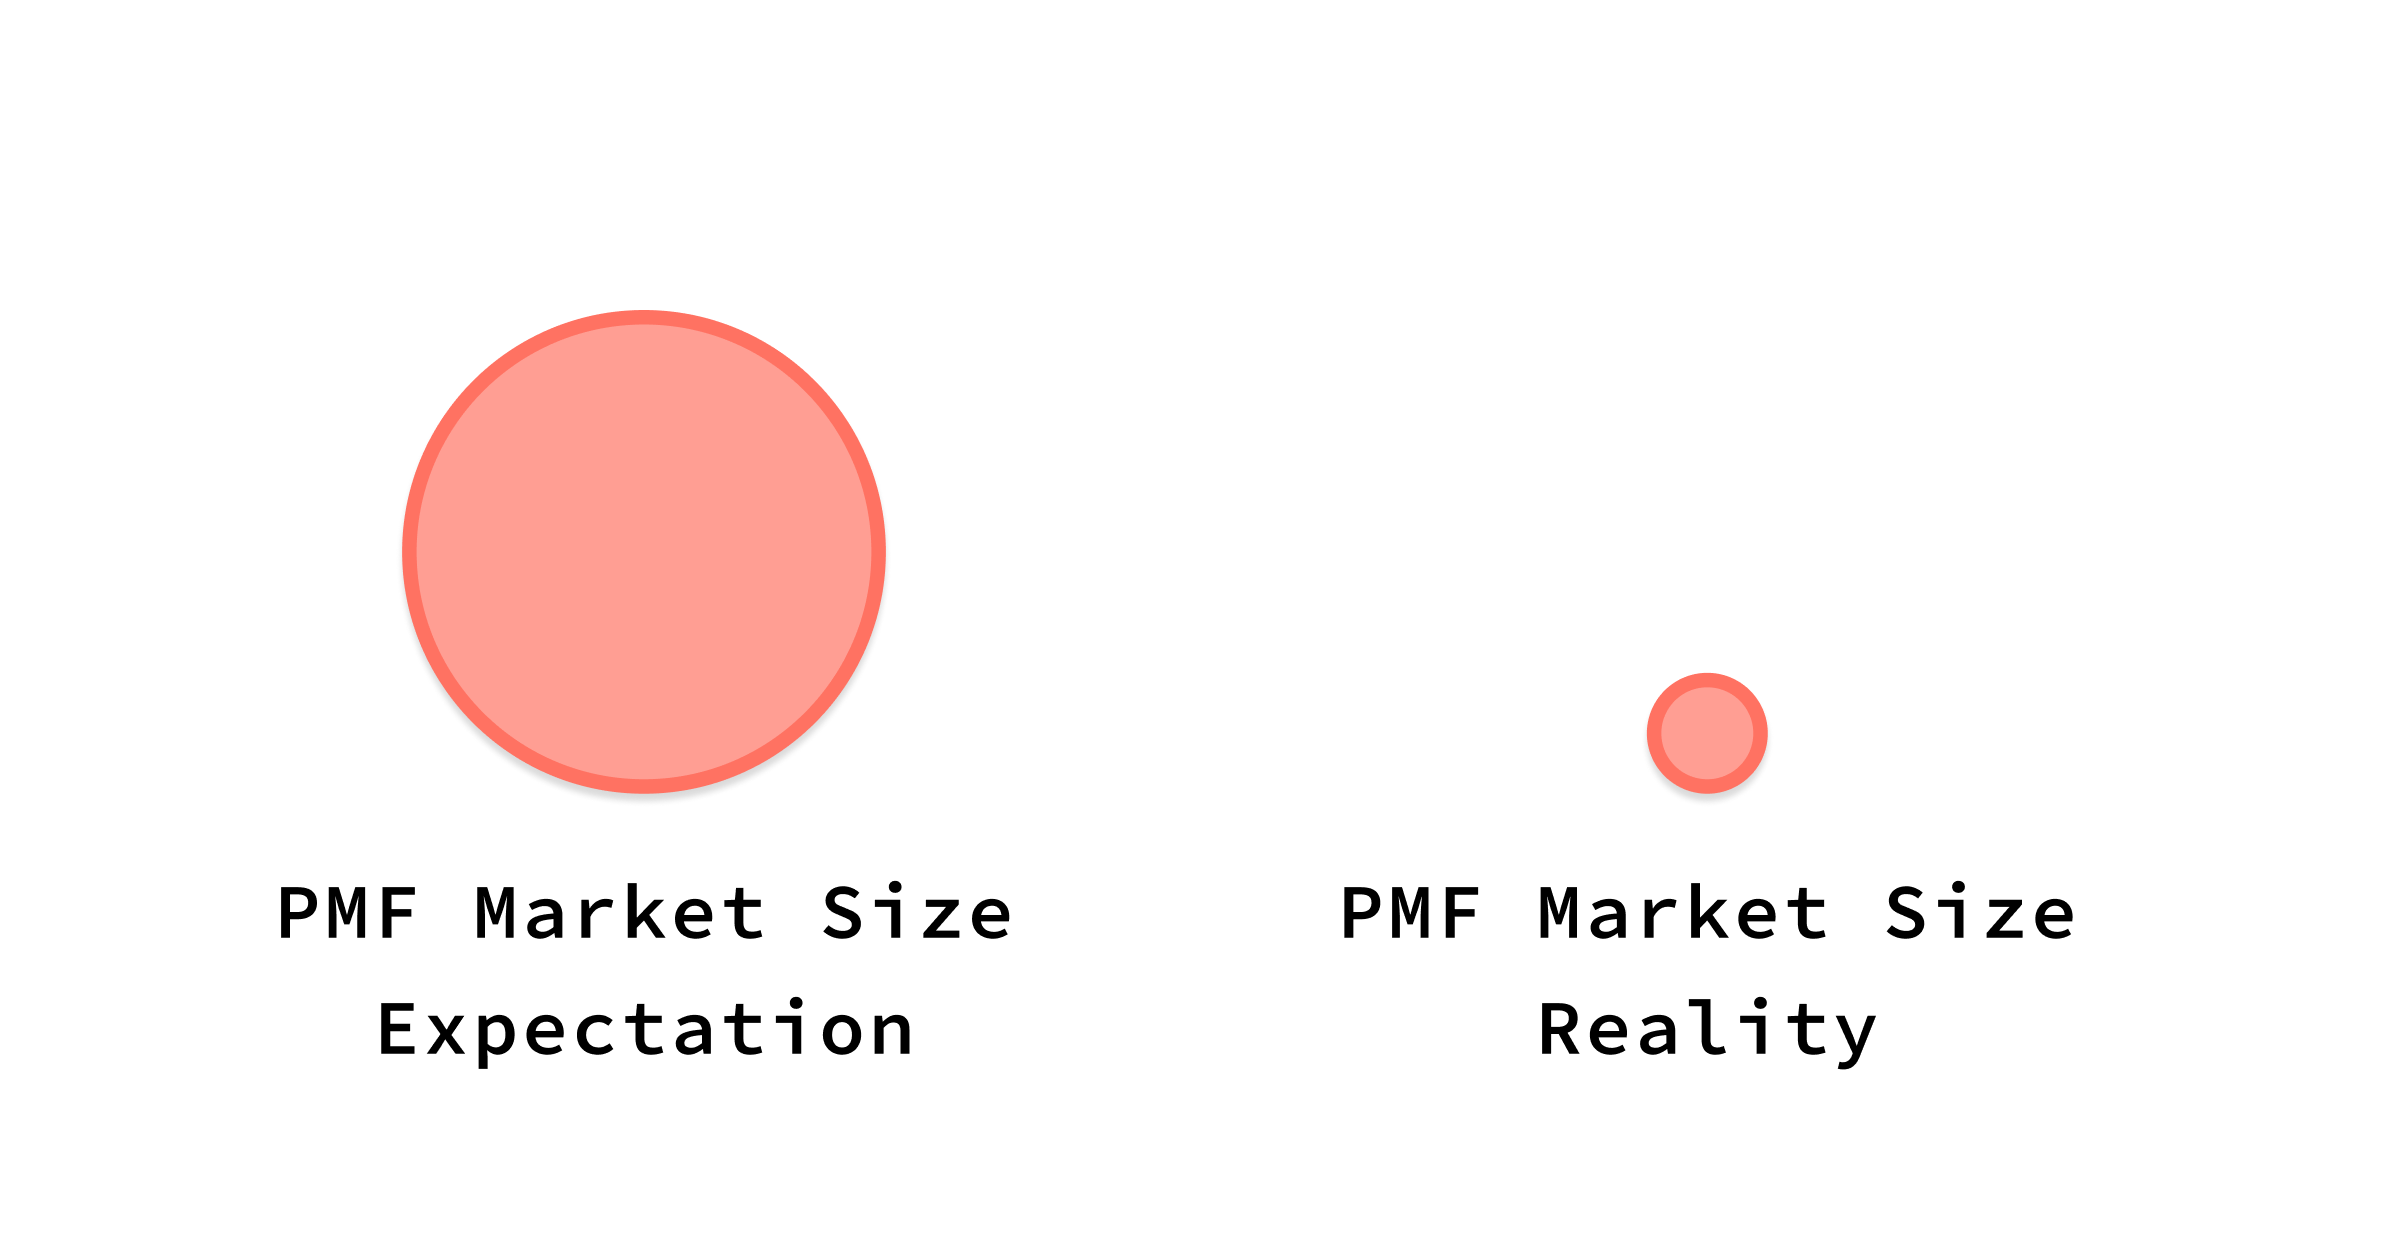 Product market fit starts in smaller markets than people think